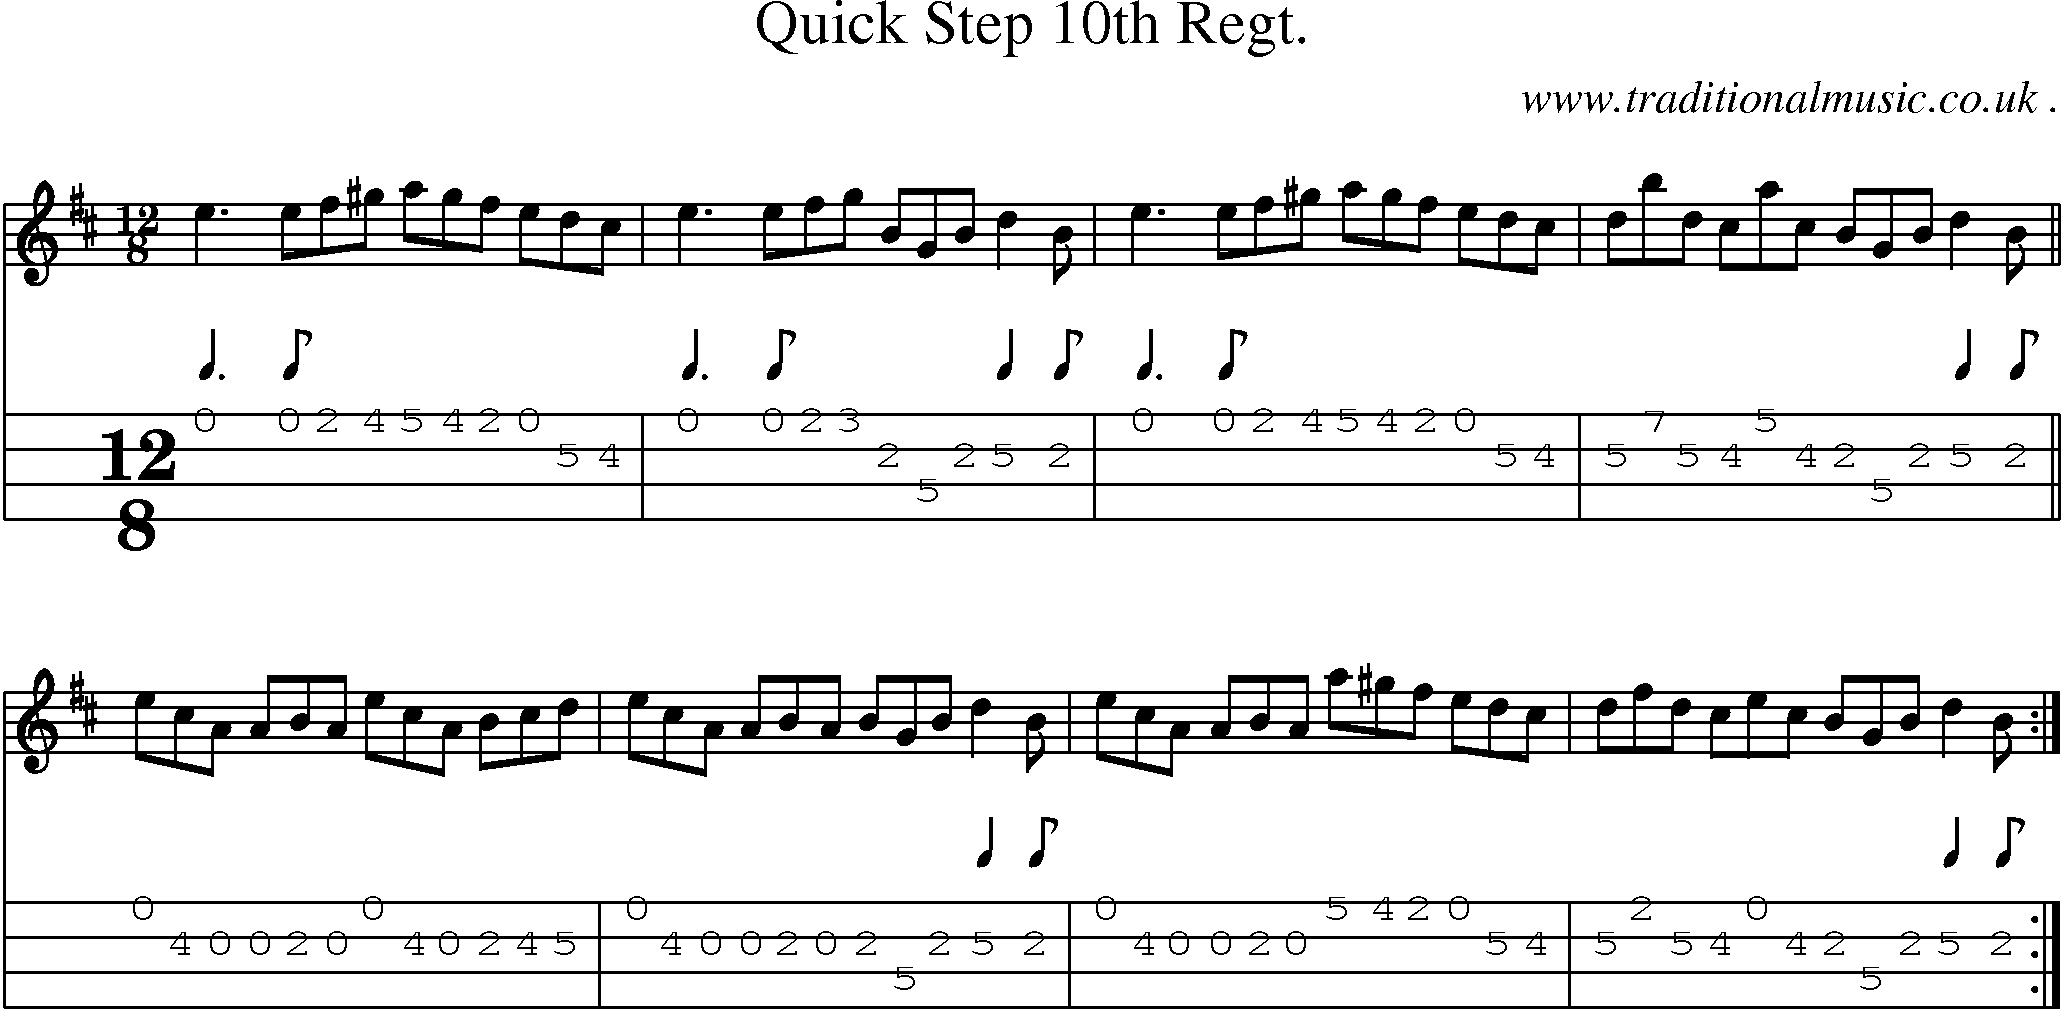 Sheet-Music and Mandolin Tabs for Quick Step 10th Regt